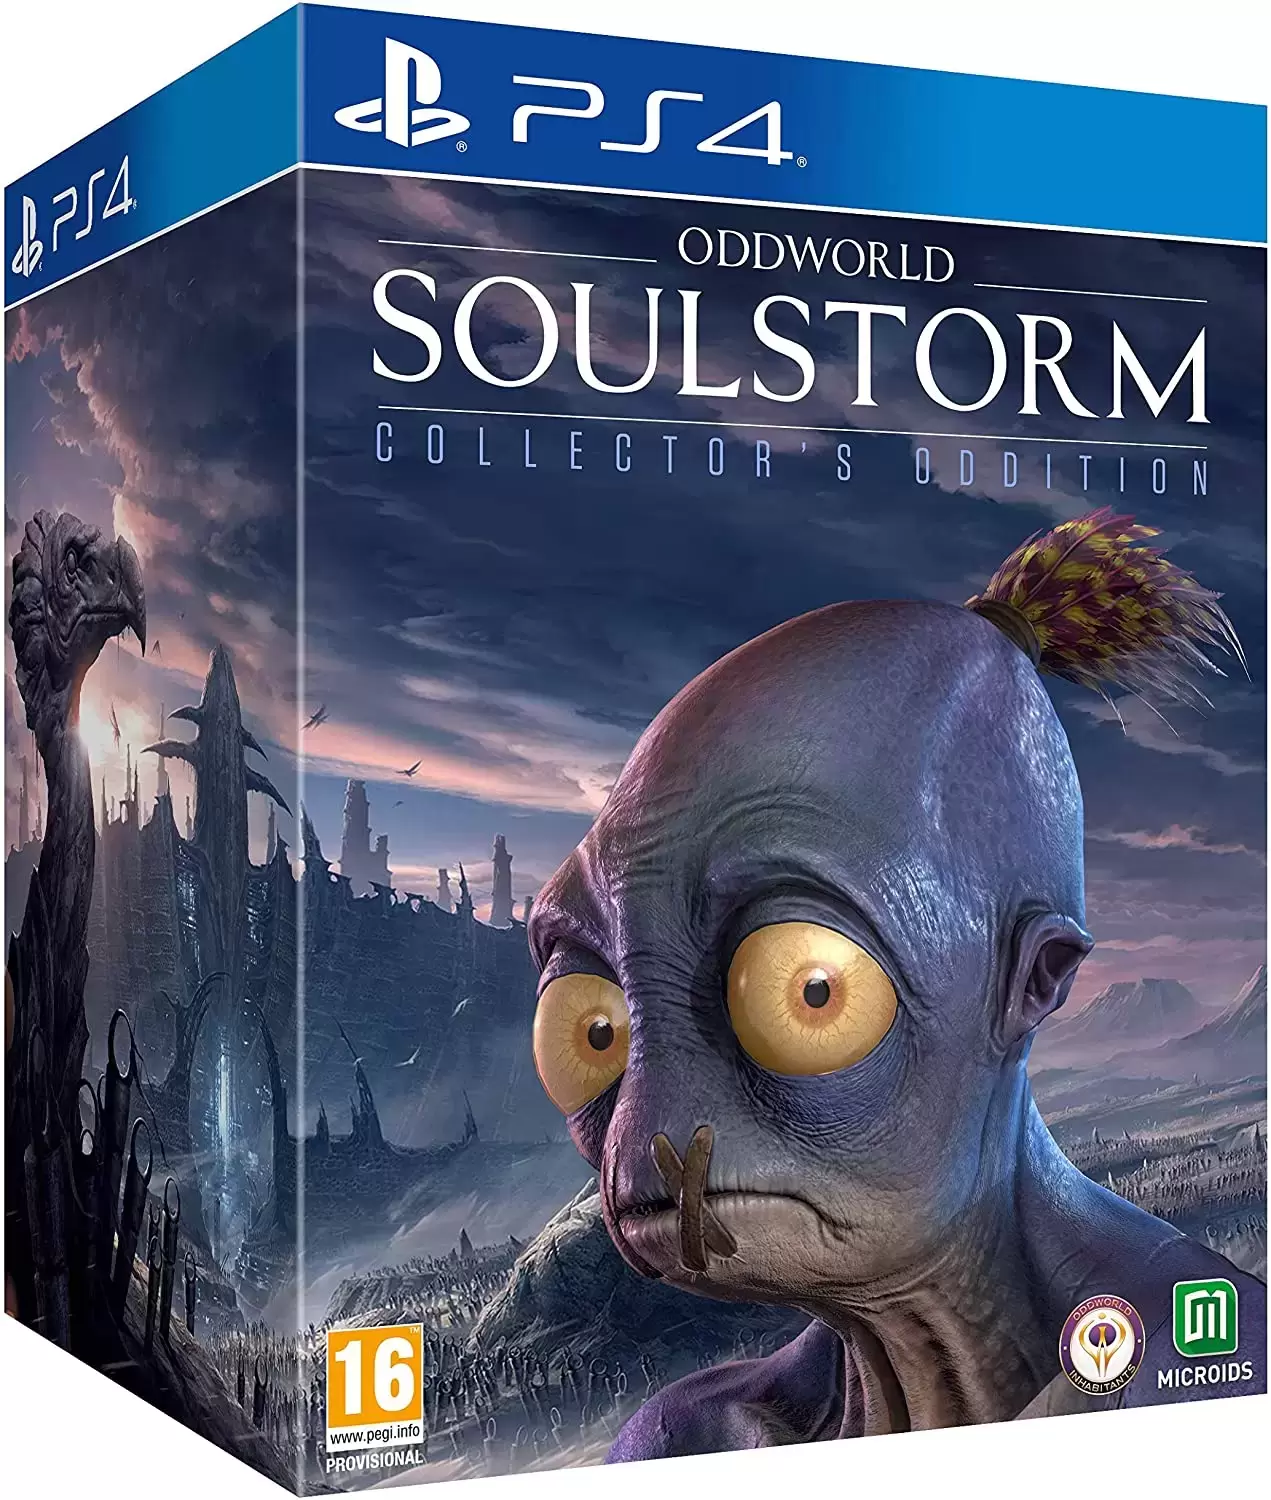 Jeux PS4 - Oddworld Soulstorm Collector\'s Oddition